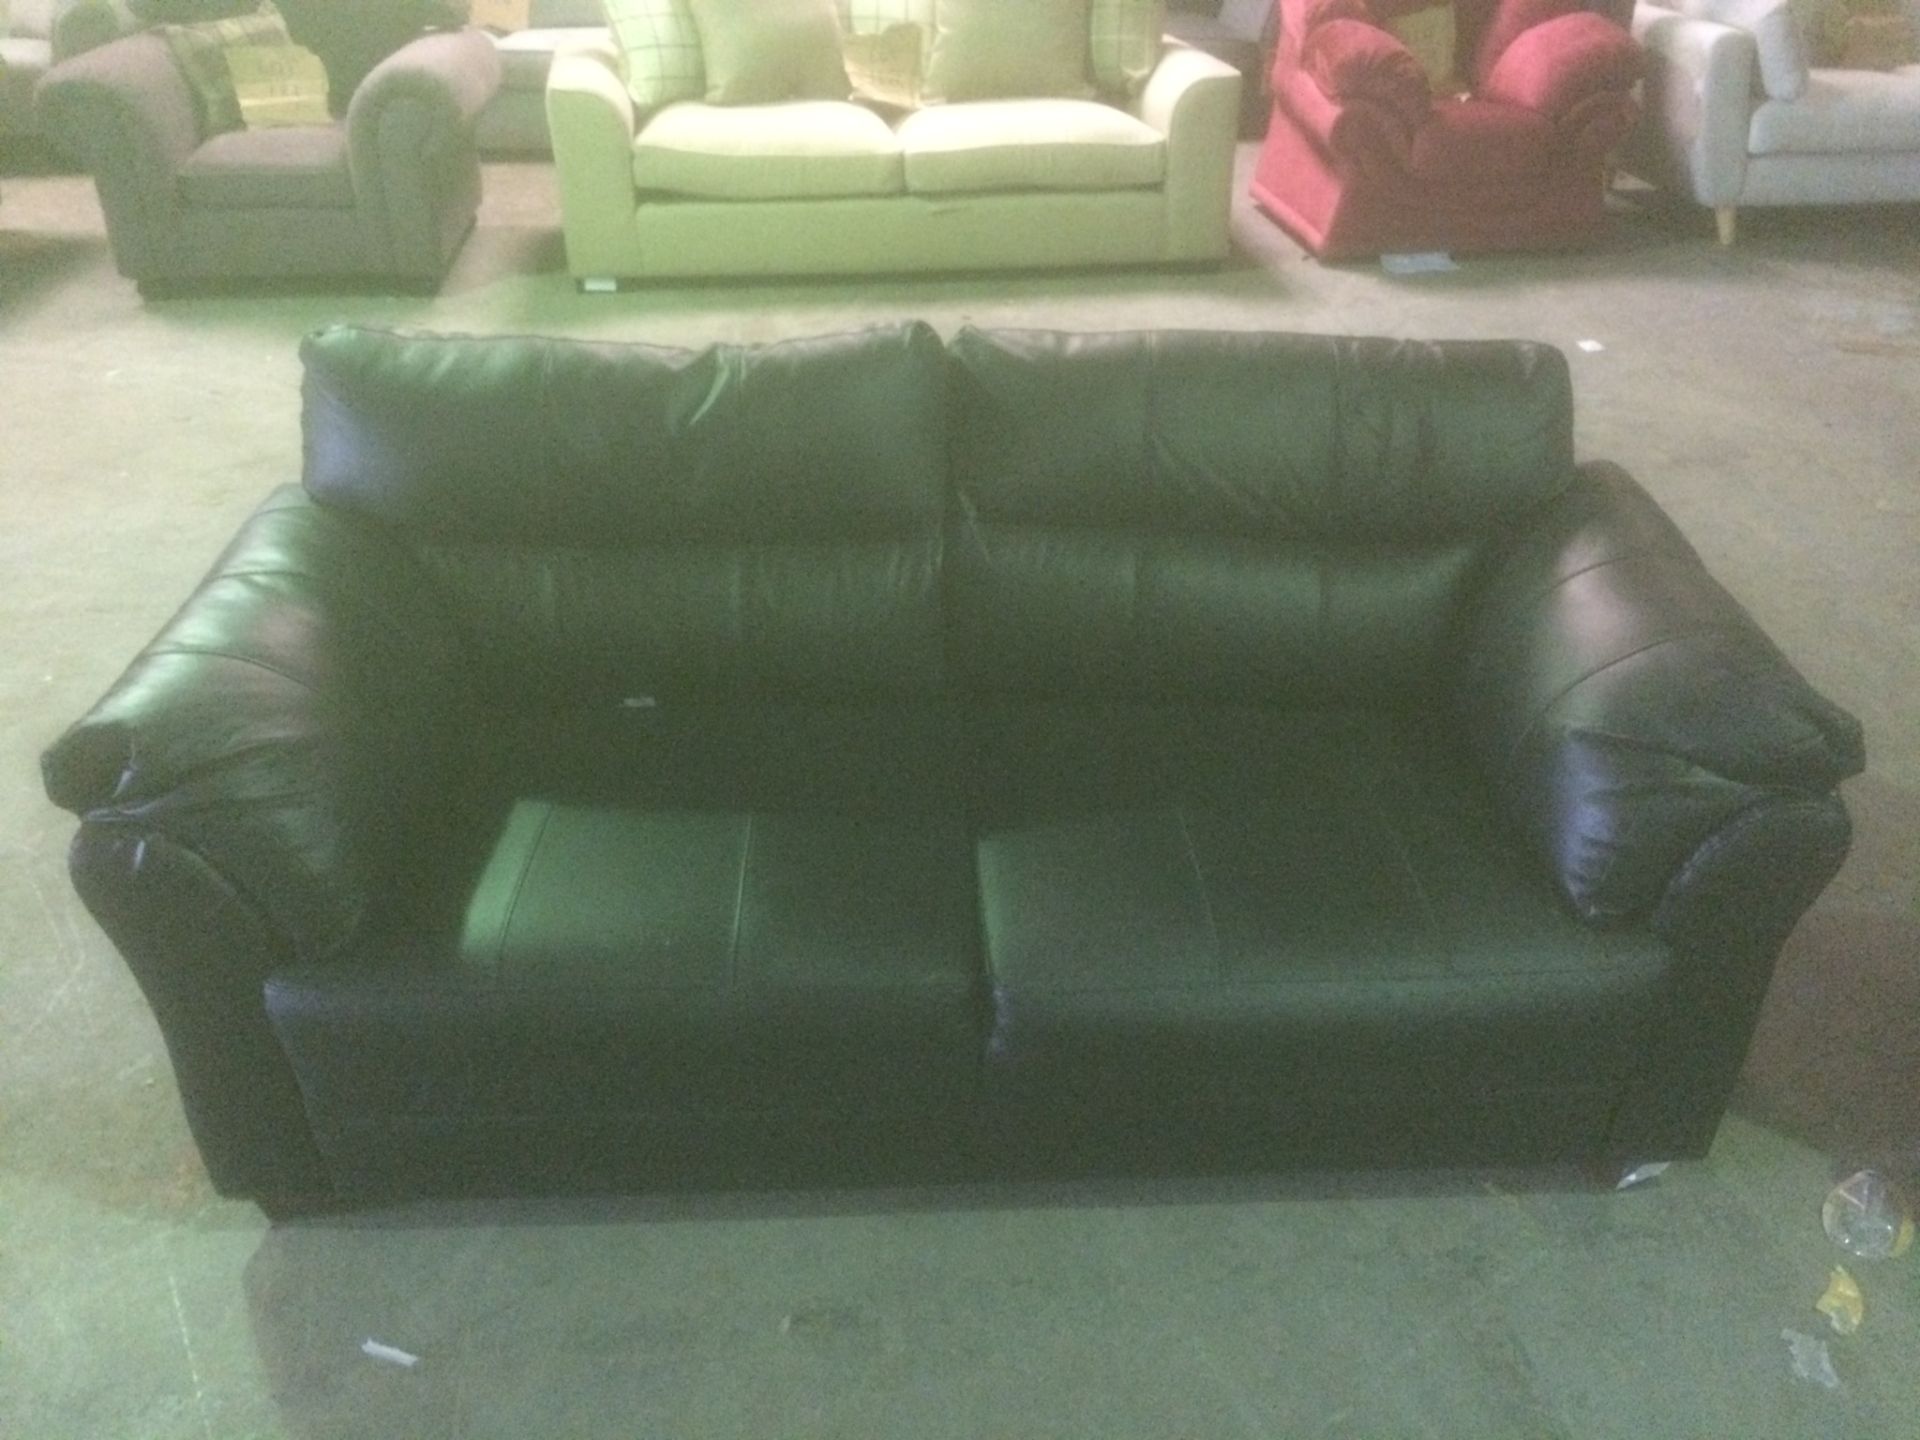 Regency 3 seater plus 2 seater black leather sofas with contrasting dark oak wooden feet - Image 3 of 3